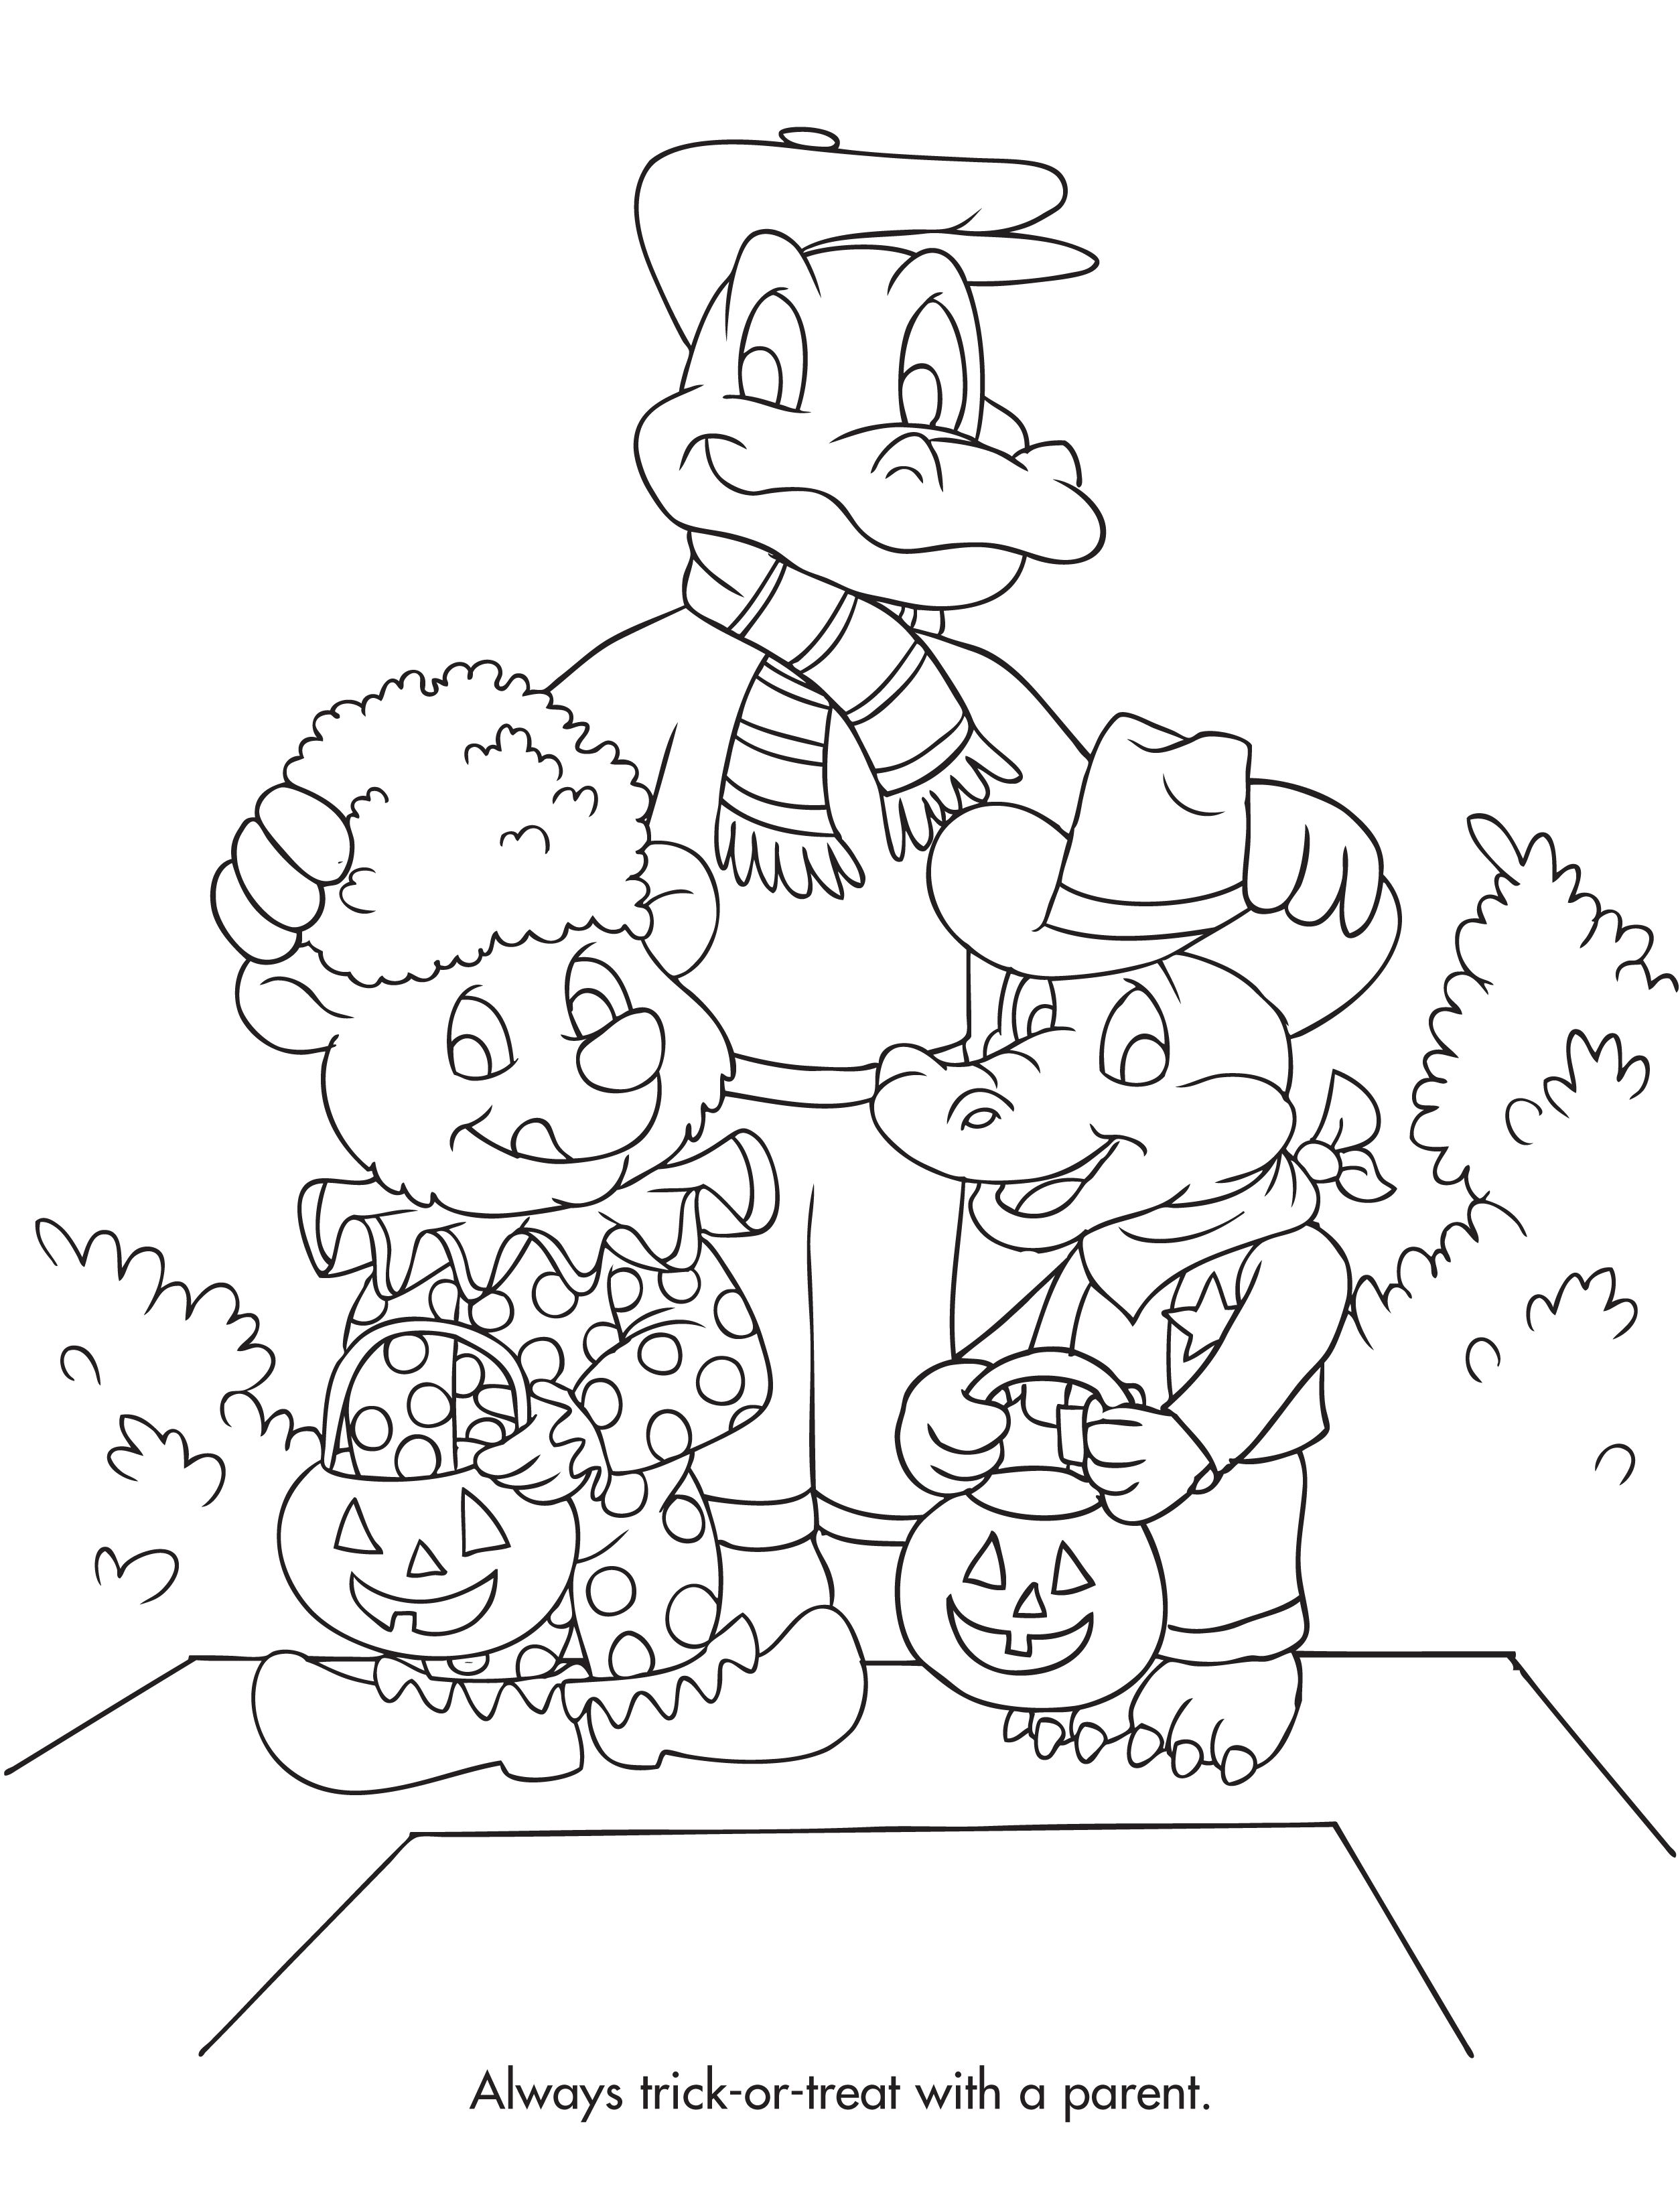 halloween-safety-coloring-pages-at-getcolorings-free-printable-colorings-pages-to-print